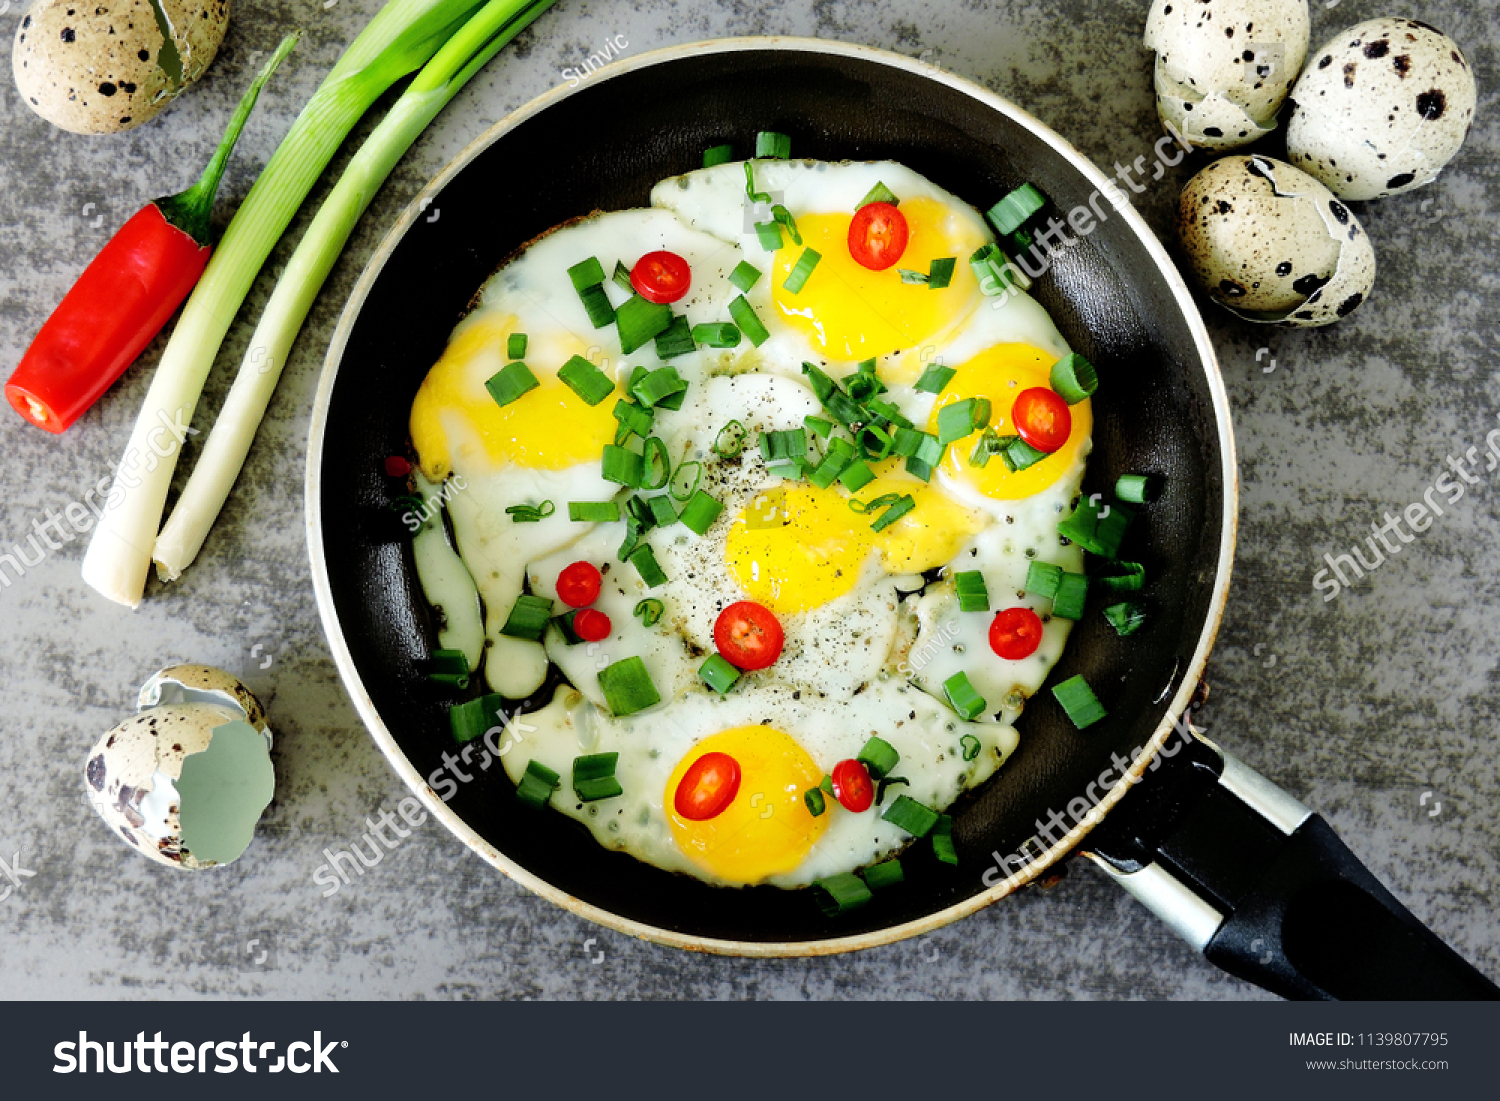 Fried quail eggs with greens and chili peppers in a skillet. Keto diet. Keto breakfast. #1139807795